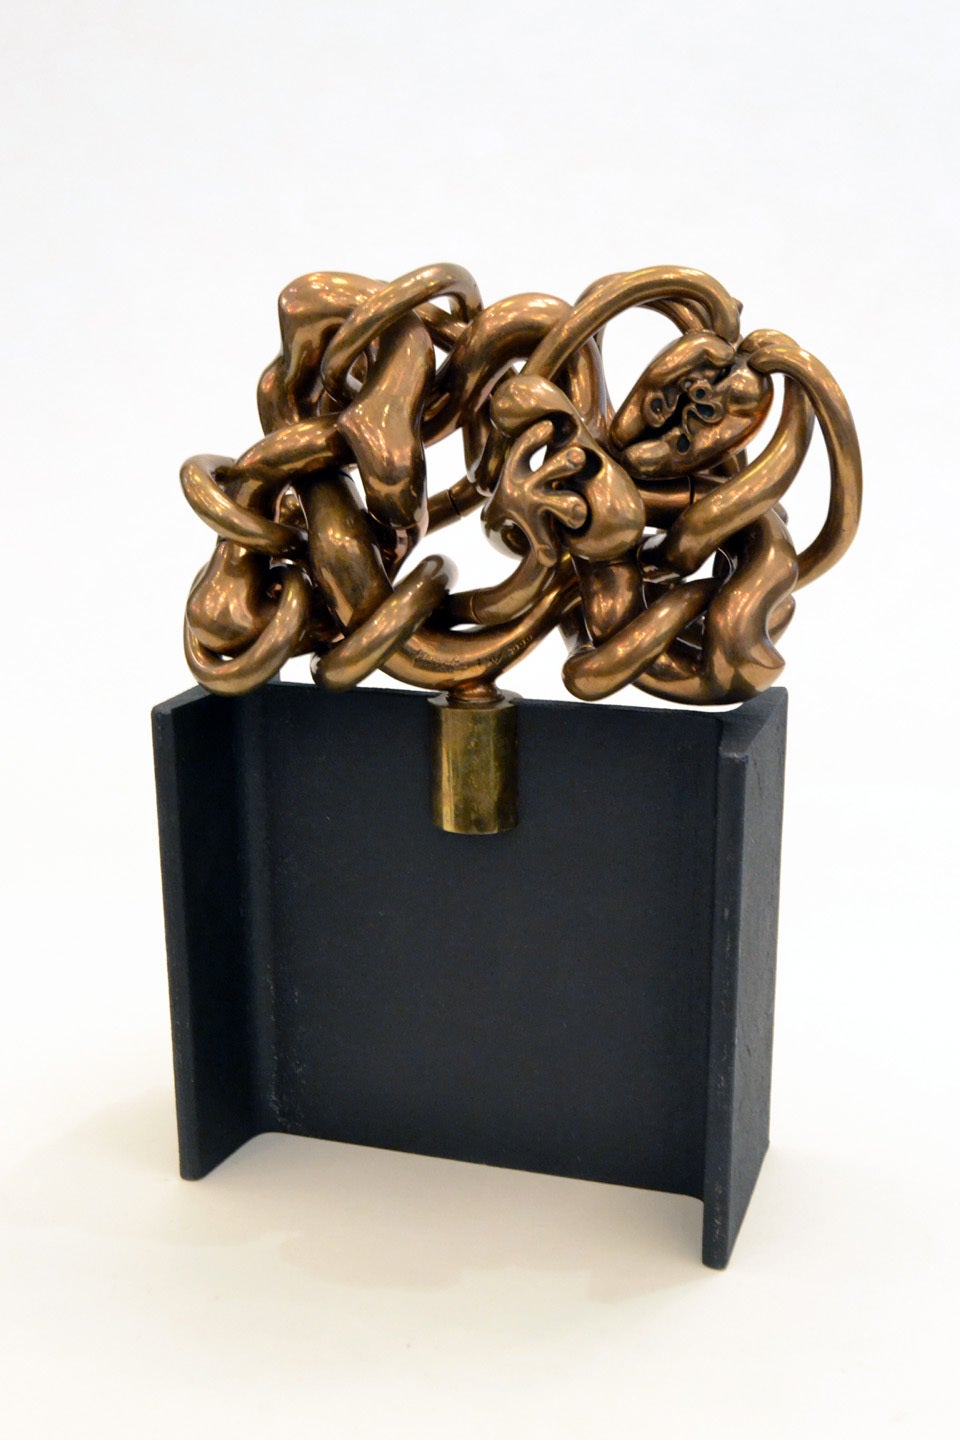 Abstract Sculpture Puzzle by Miquel Berrocal